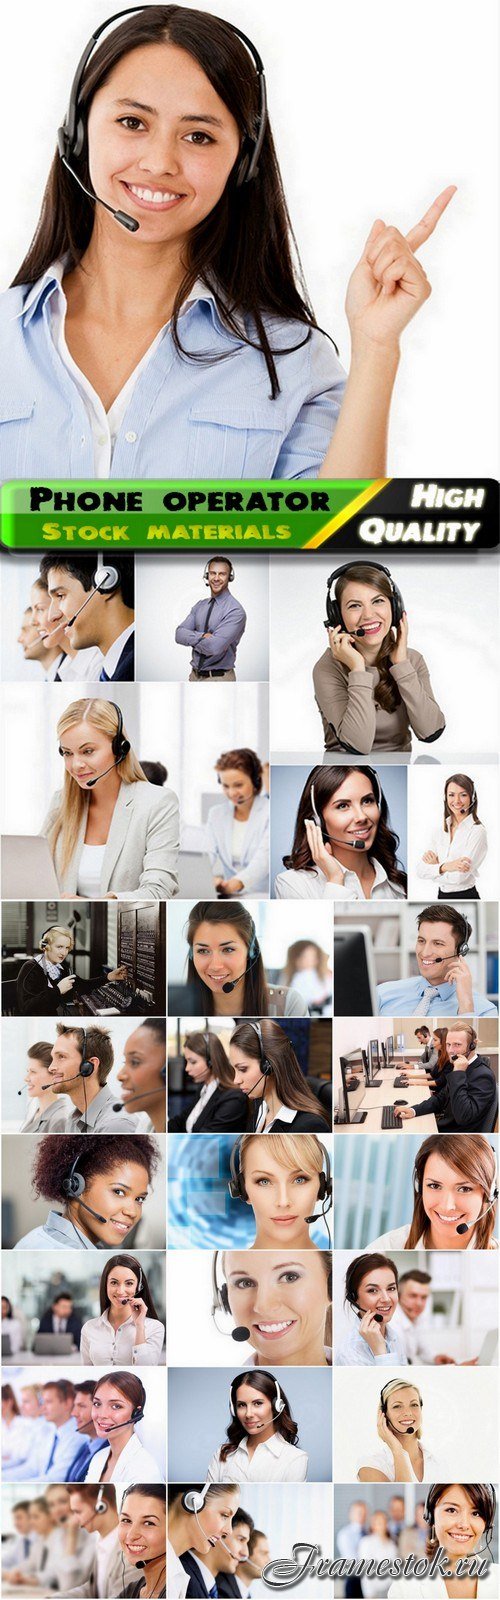 Phone operator and support service - 25 HQ Jpg